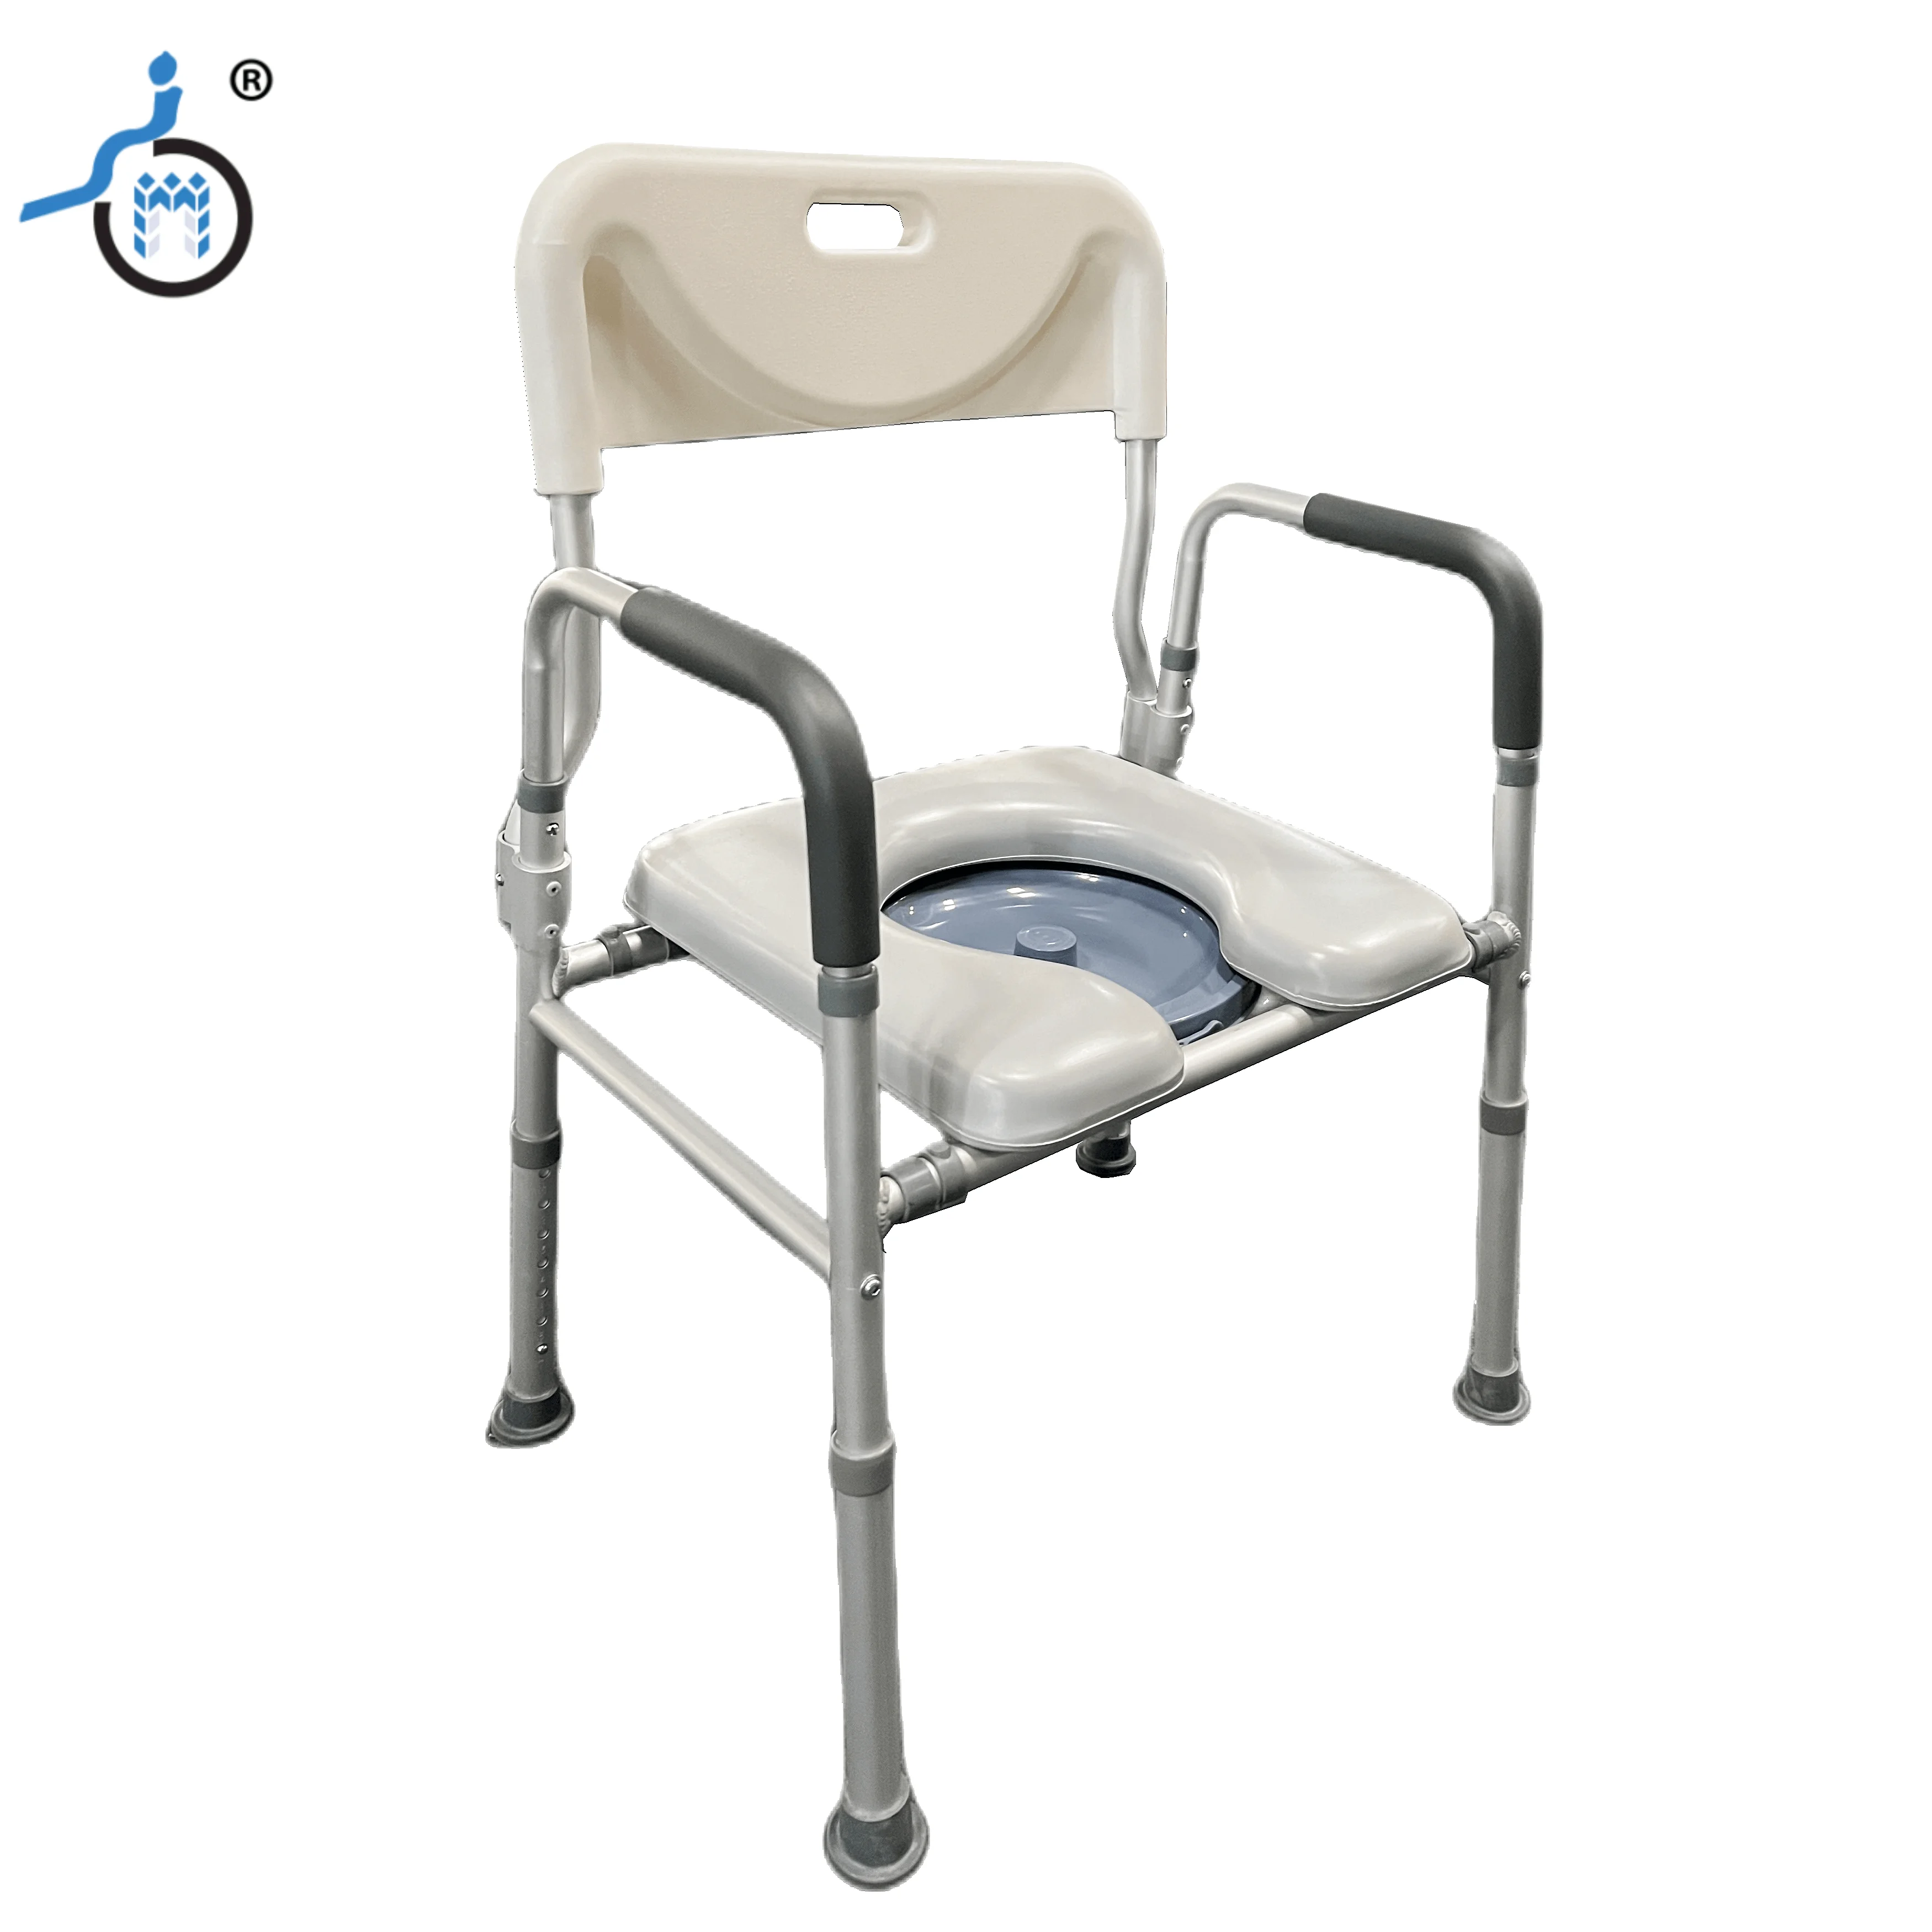 AUITOA 4-in-1 Raised Toilet Seat with Handles and Back, 300lb Medical  Bedside Commode Chair, Adjustable Toilet Safety Frame, Shower Chair for  Seniors, Handicap, Pregnant, with Collapsible Basin 